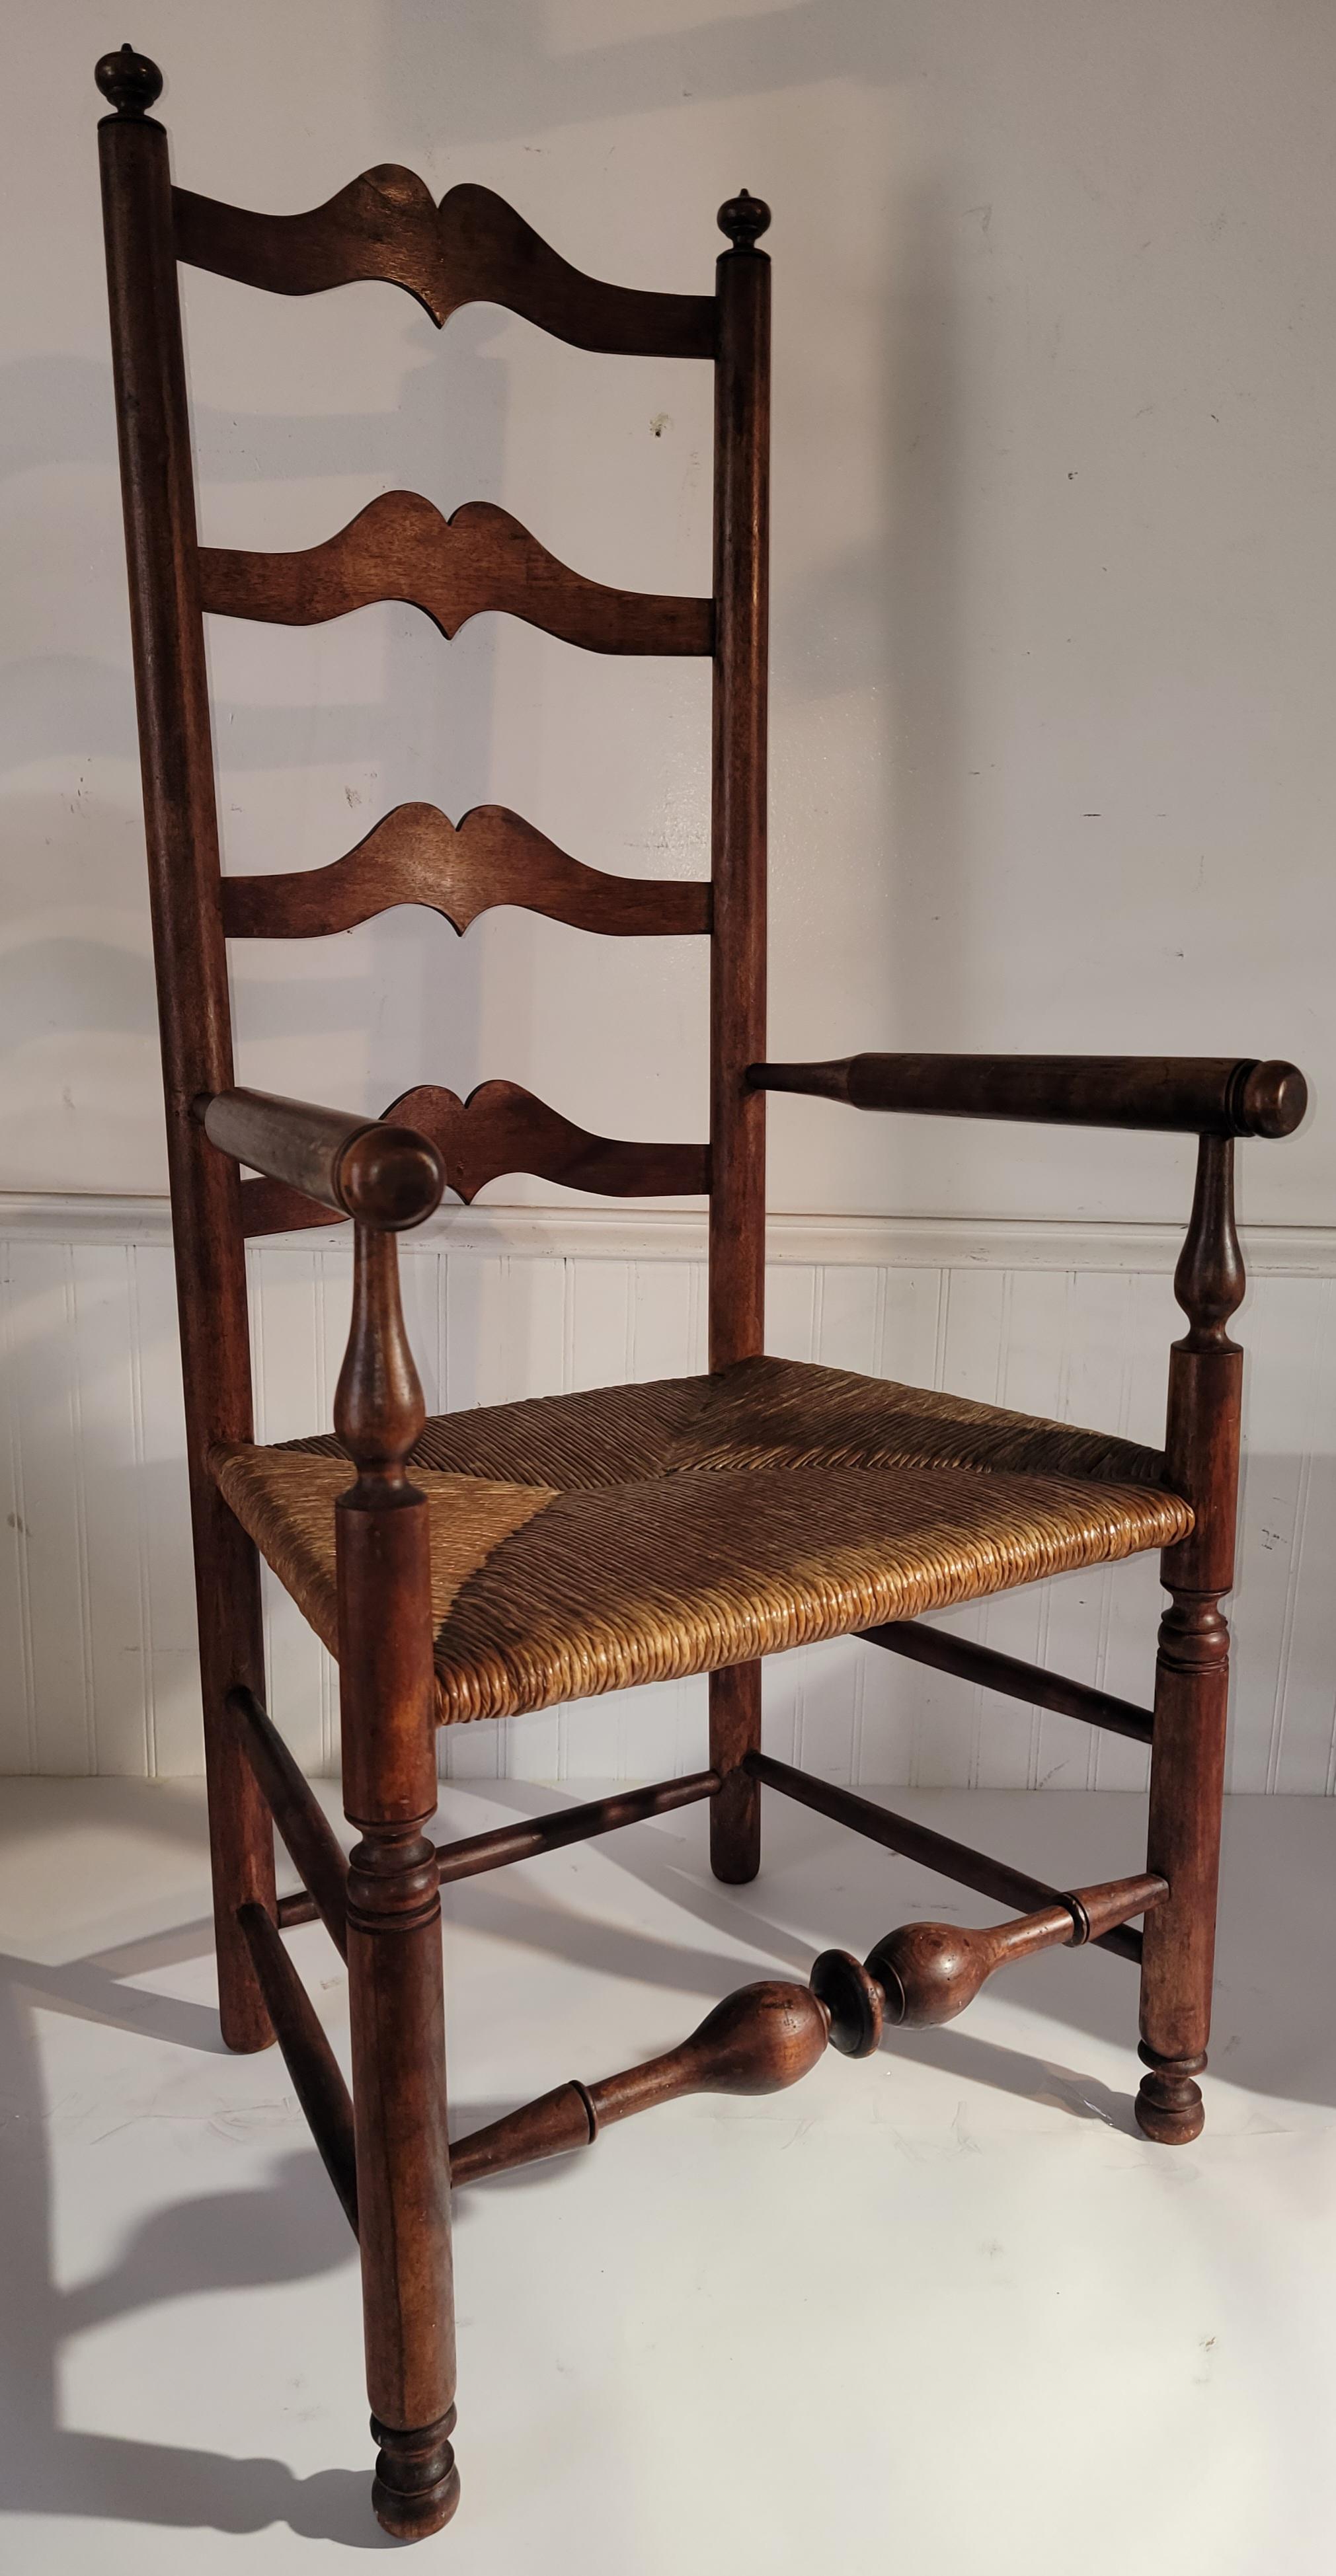 19Thc New England ladder back arm chair with hand woven seat.This chair has most unusual cut outs and wonderful aged patina.